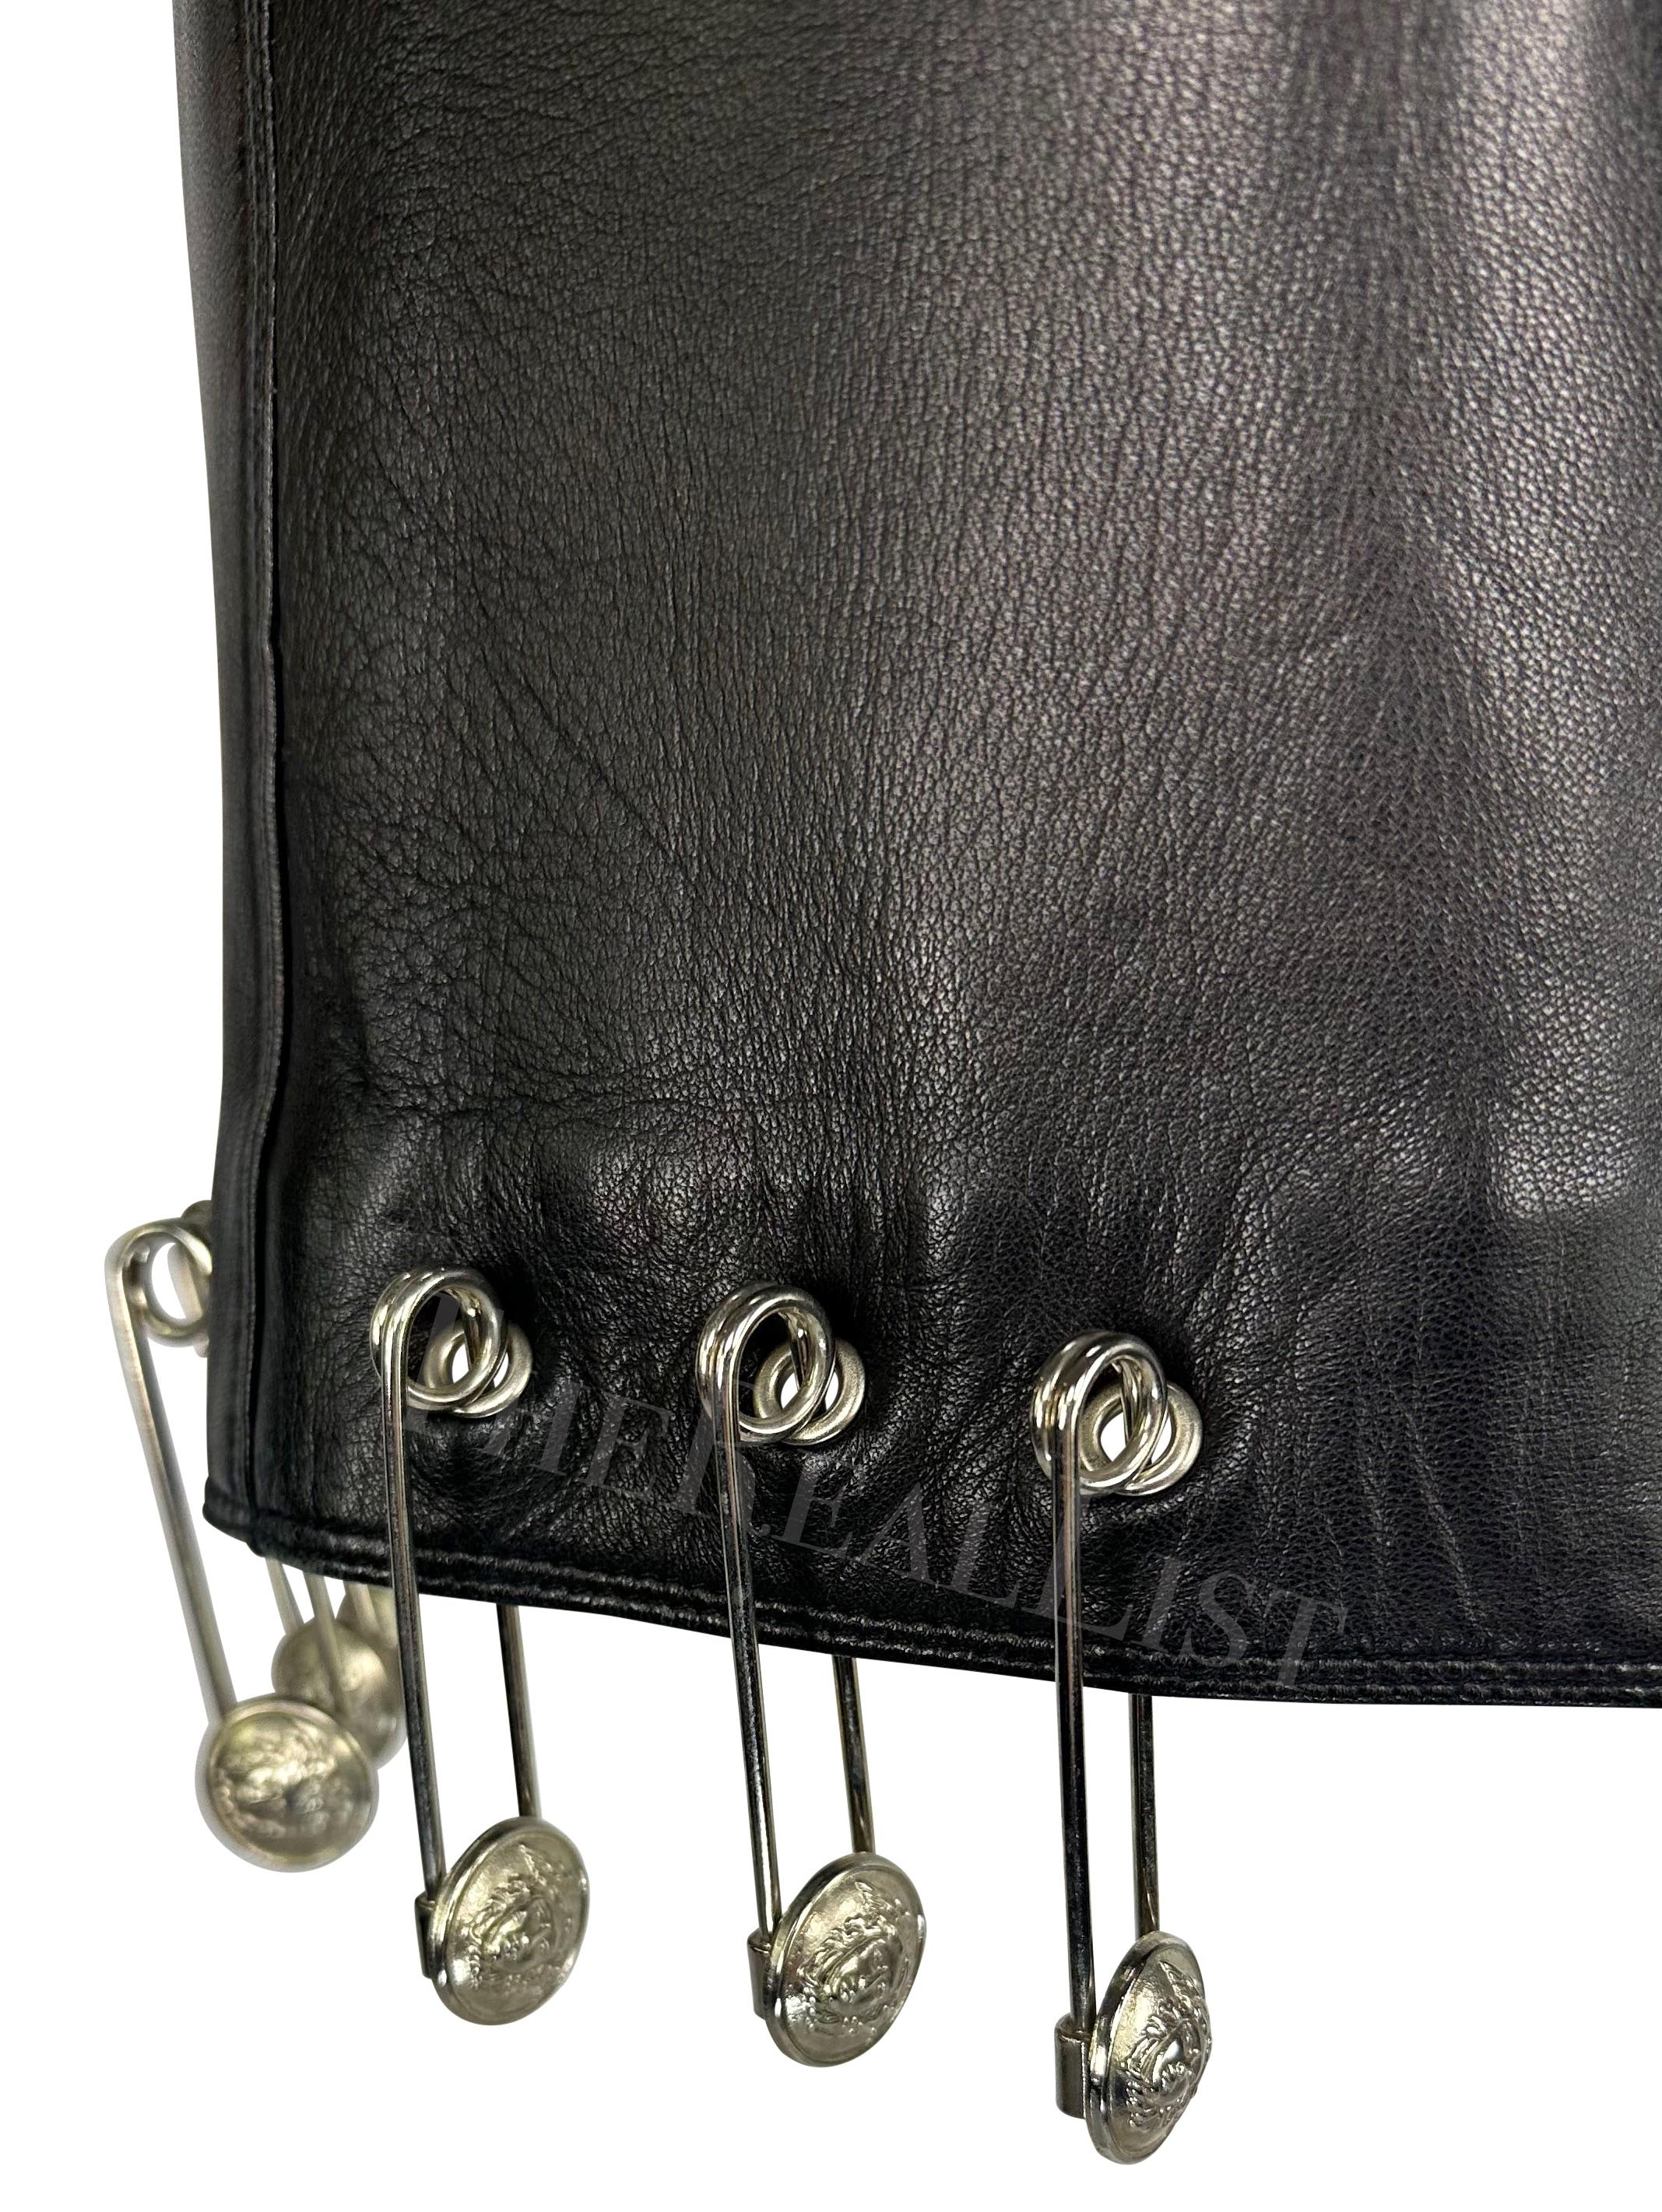 S/S 1994 Gianni Versace Safety Pin Medusa Pierced Black Leather Belted Skirt For Sale 1